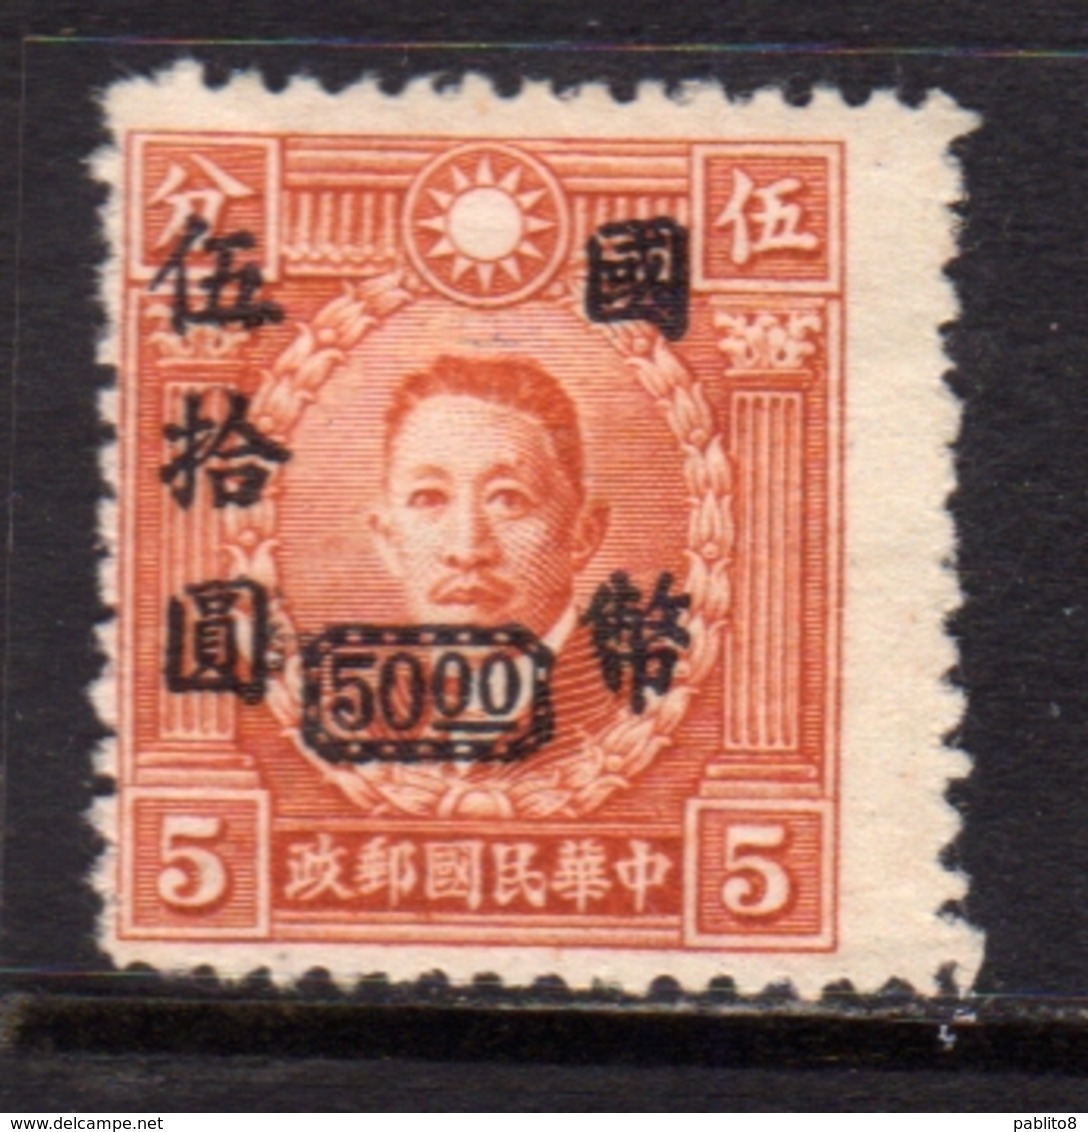 CHINA CINA 1946 LIAO CHUNG-KAI SURCHARGED 50$ On 5c USATO USED OBLITERE' - 1912-1949 Republic